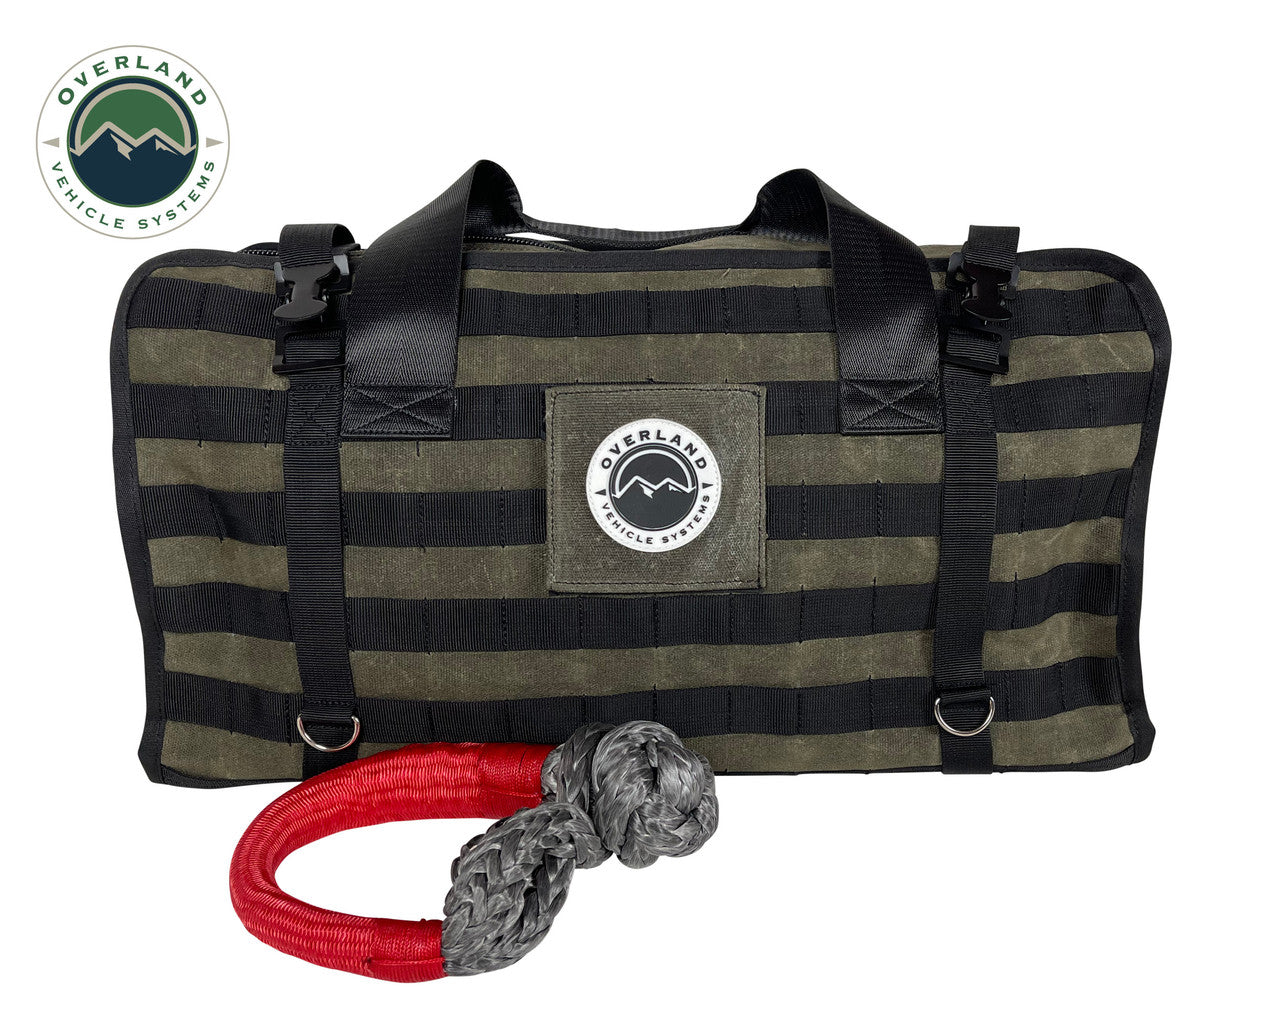 OVS Large Recovery Bag With Handle And Straps - #16 Waxed Canvas